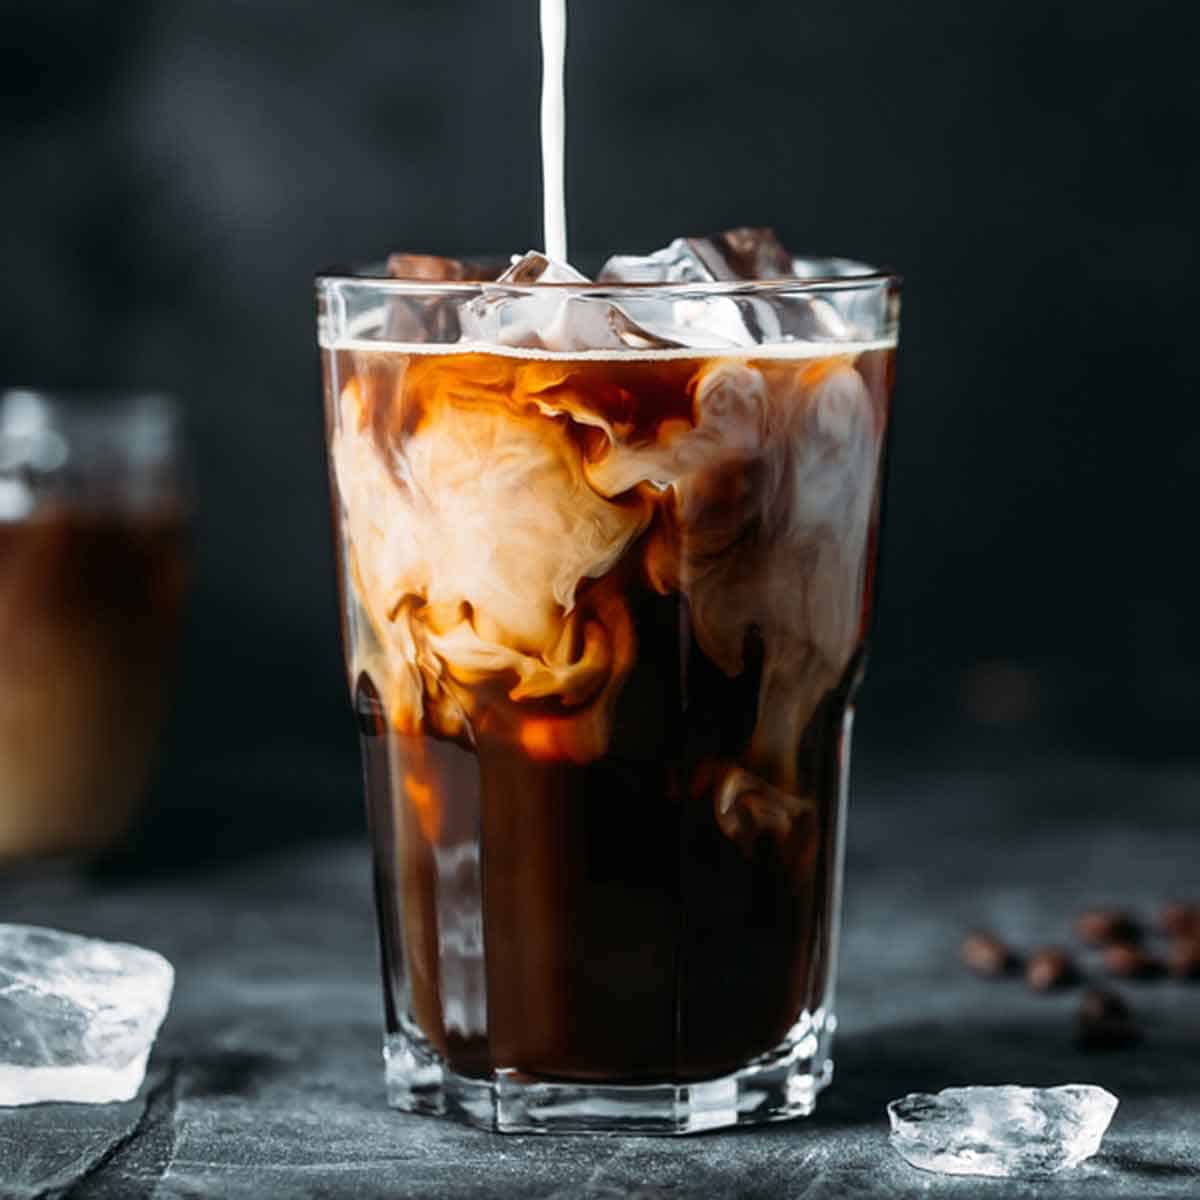 A glass filled with ice, coffee concentrate and cream.